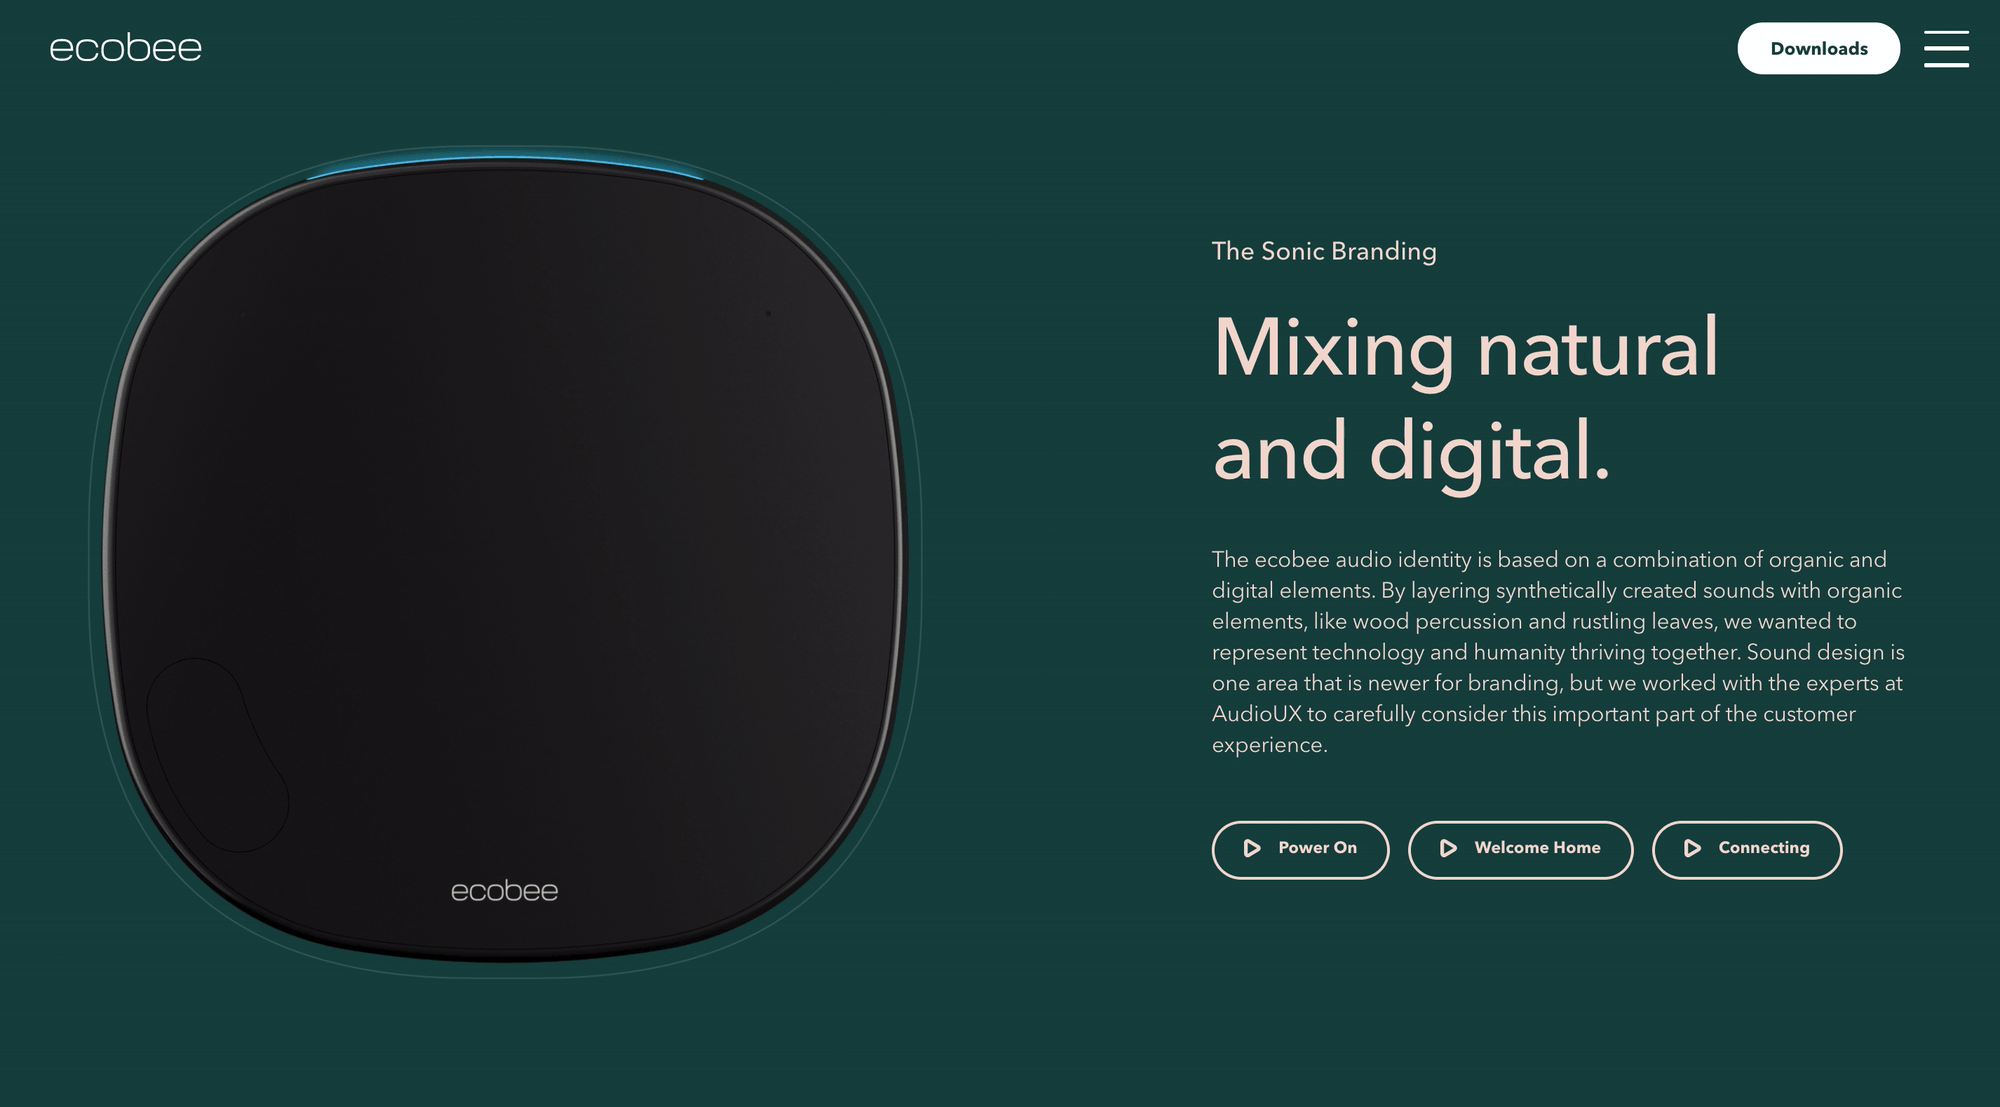 The ecobee Sonic Branding section of their website.